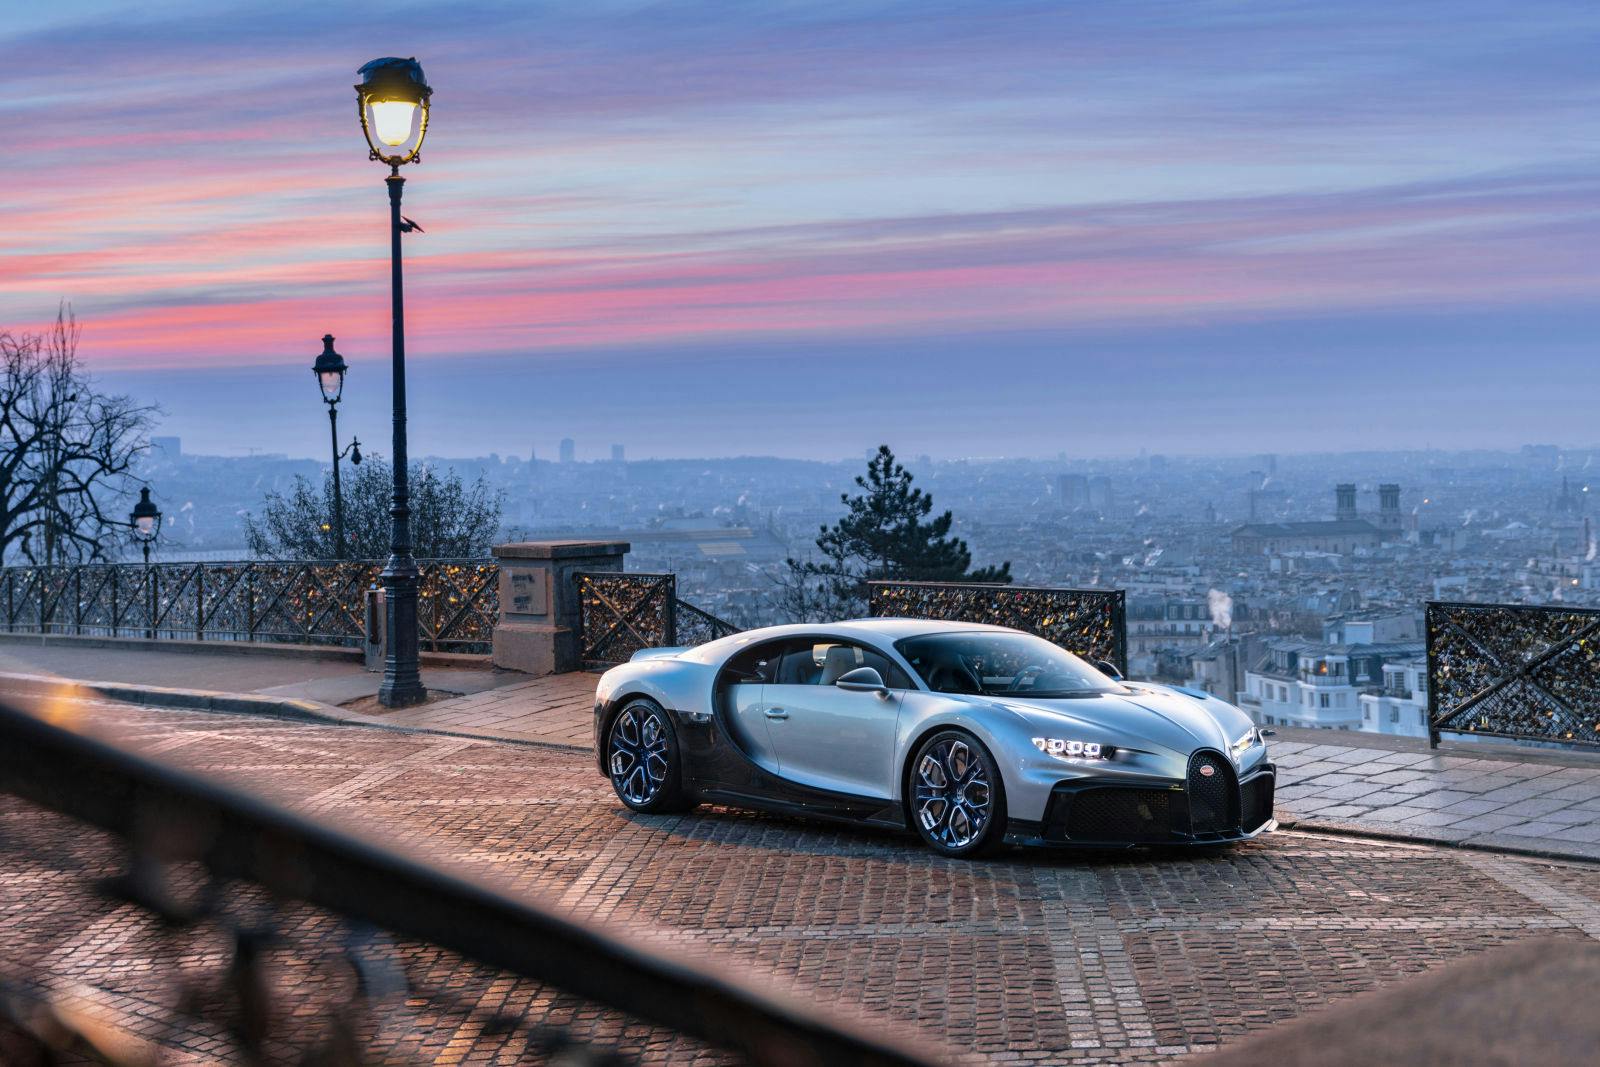 The Chiron Profilée  made a stopover in Montmartre before the February 1 auction.